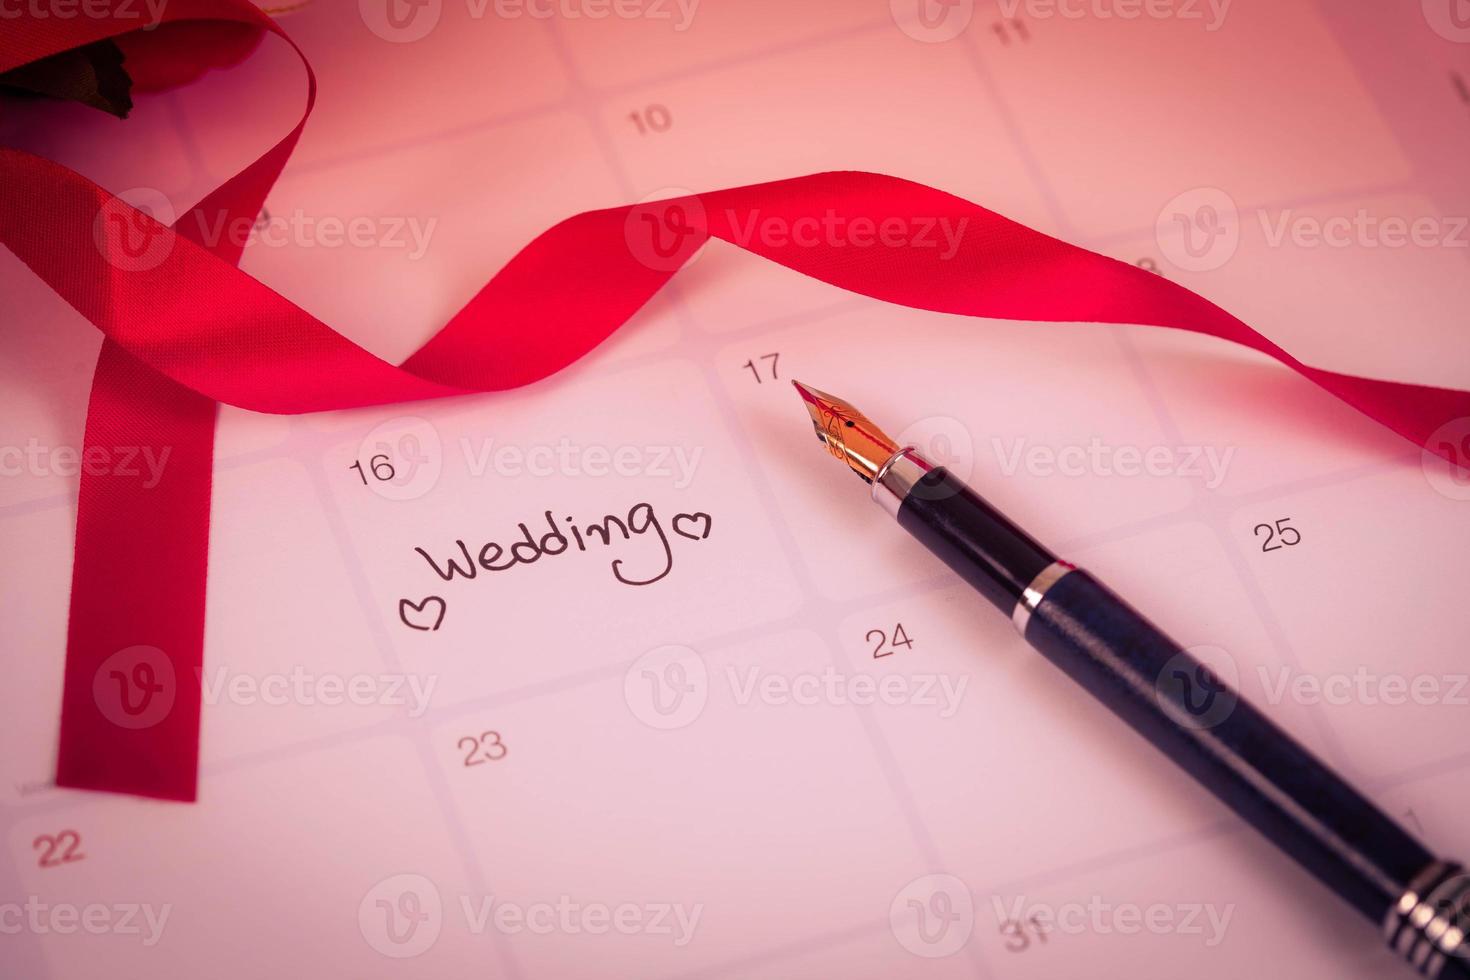 Reminder Wedding day in calendar planning and fountain pen with color tone. photo